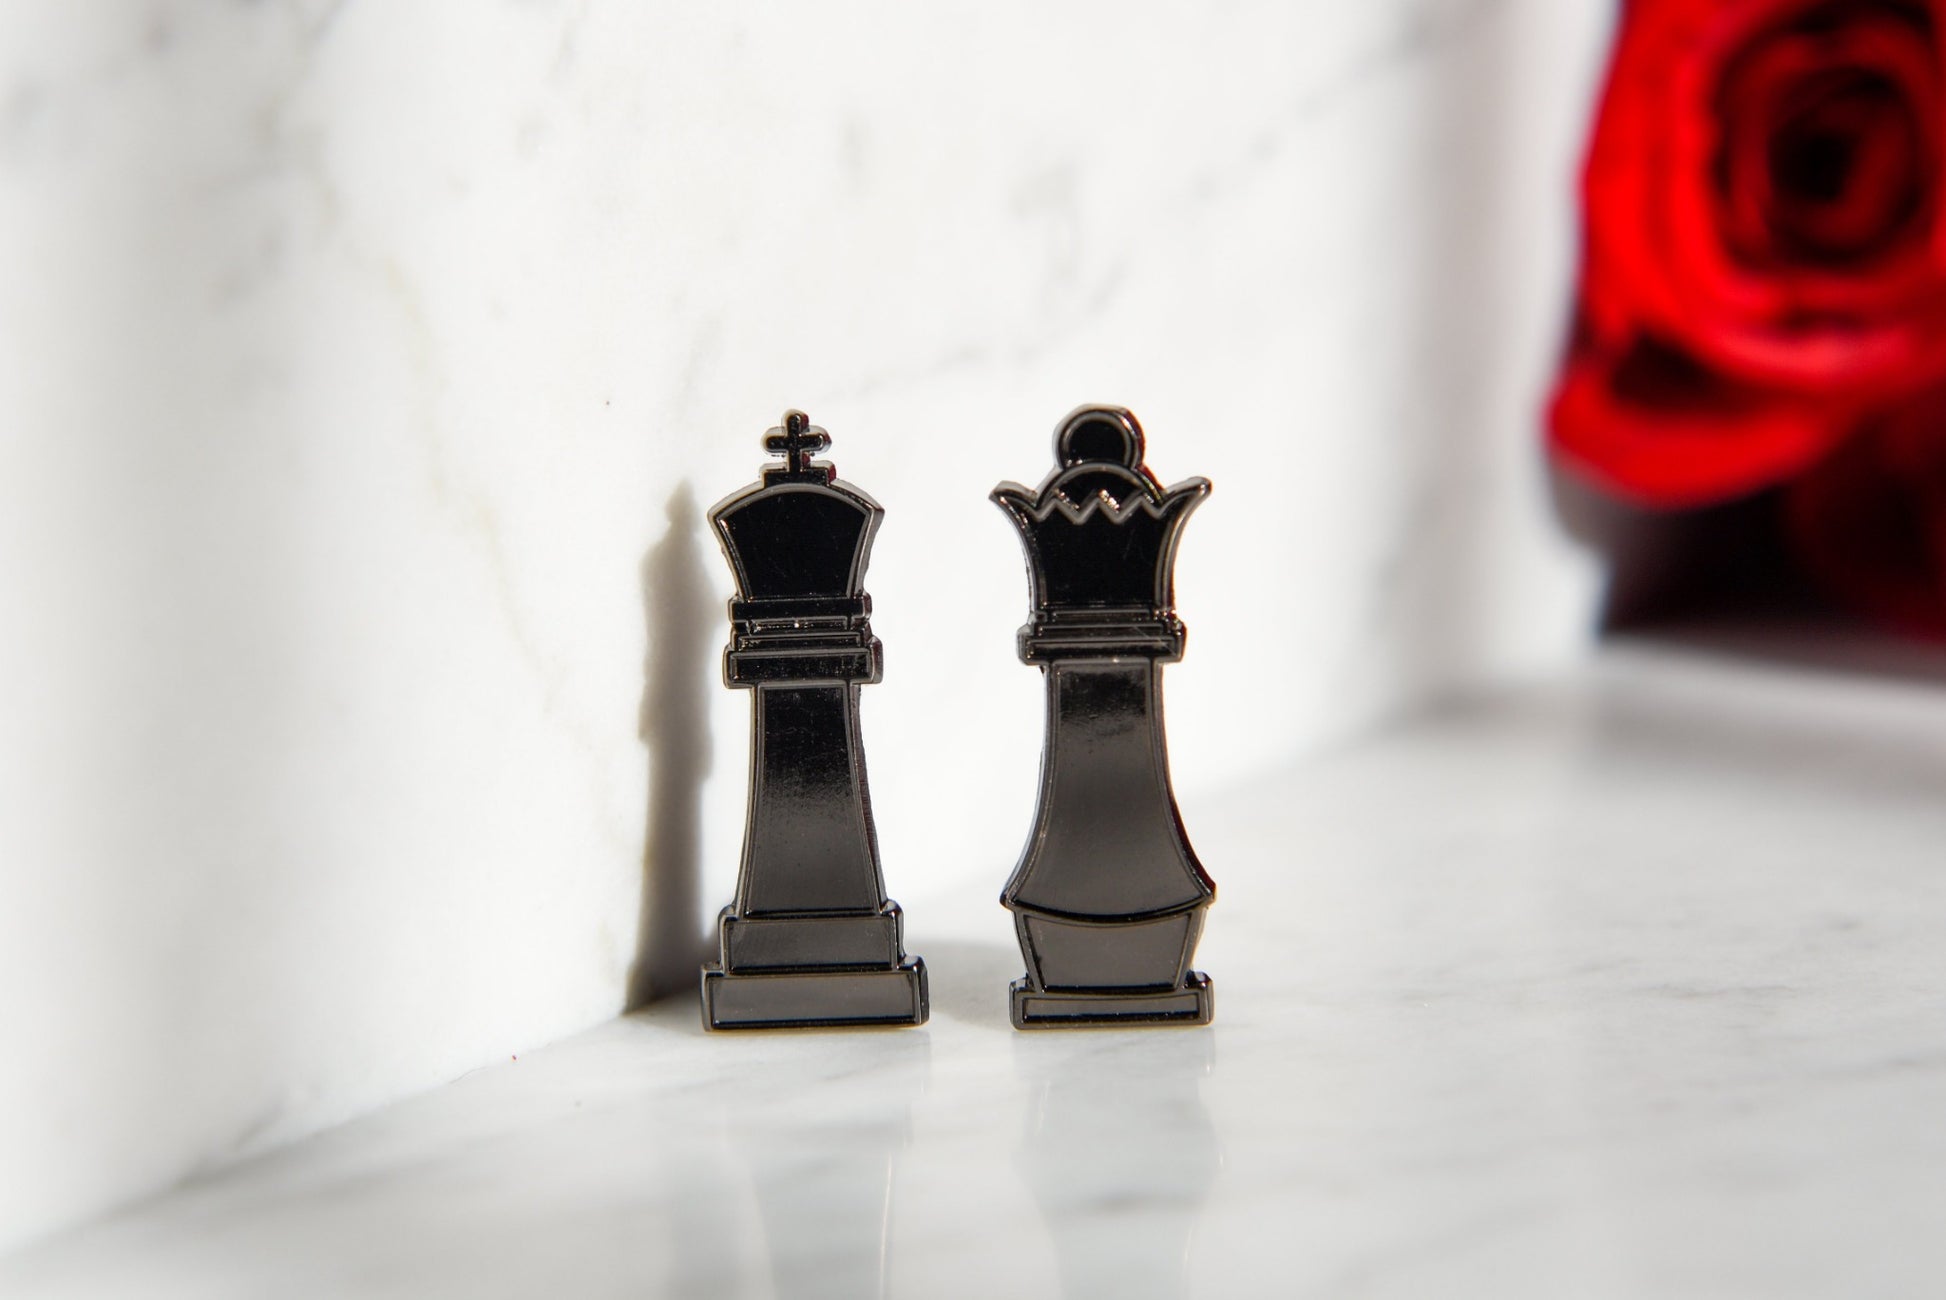 Pin on Chess Sets